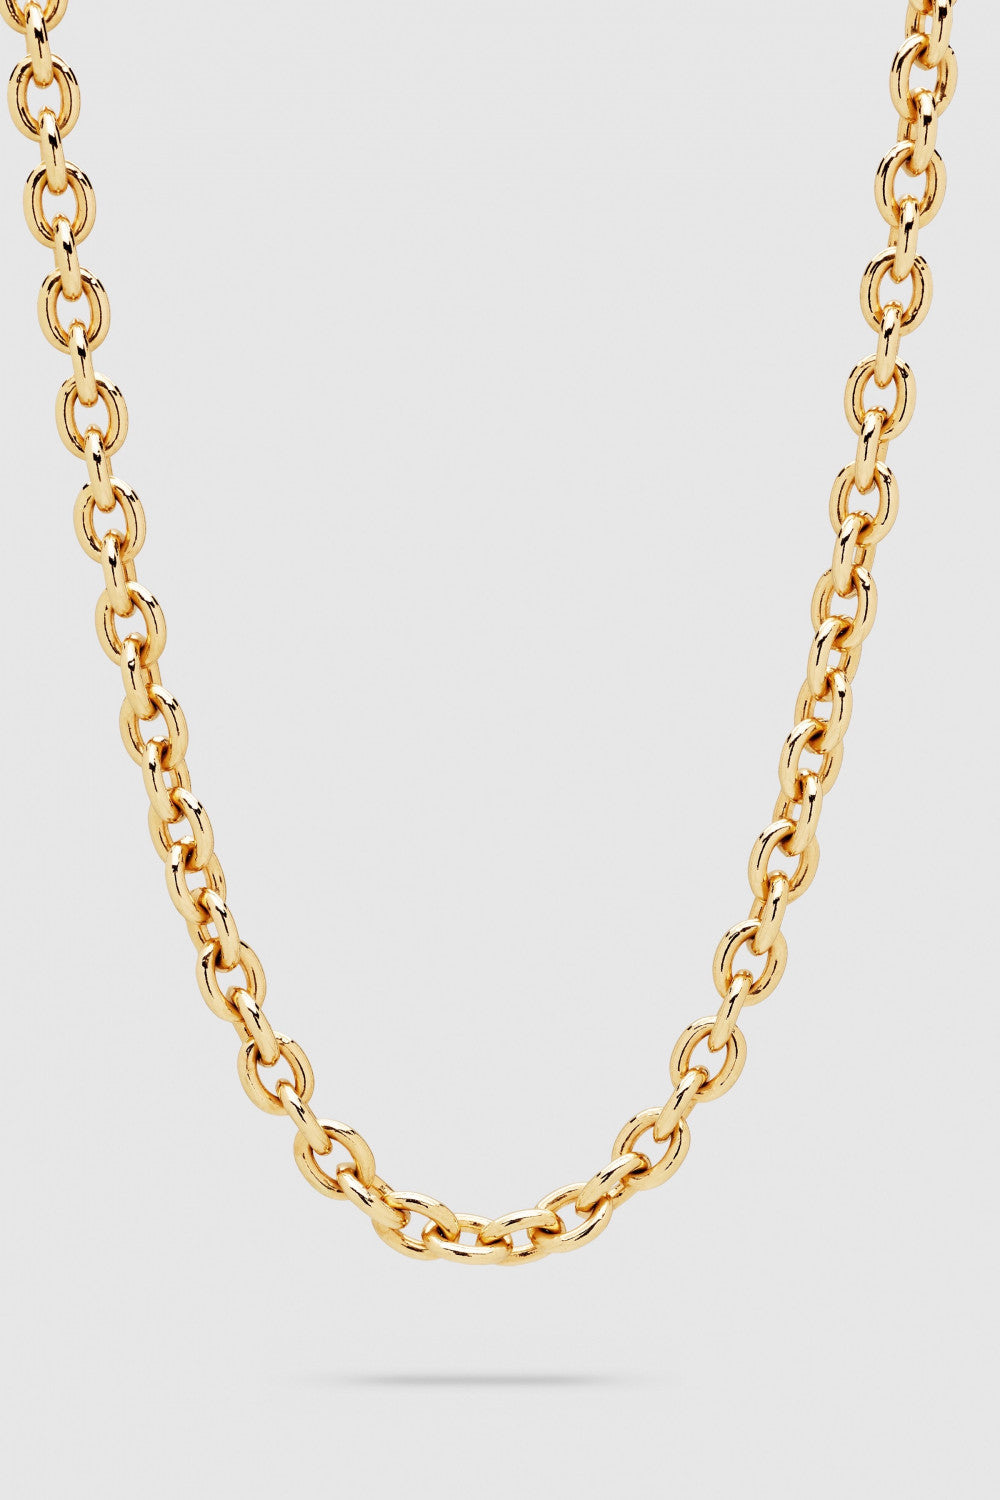 Ada Chain Thick Gold Long 24,5 inch